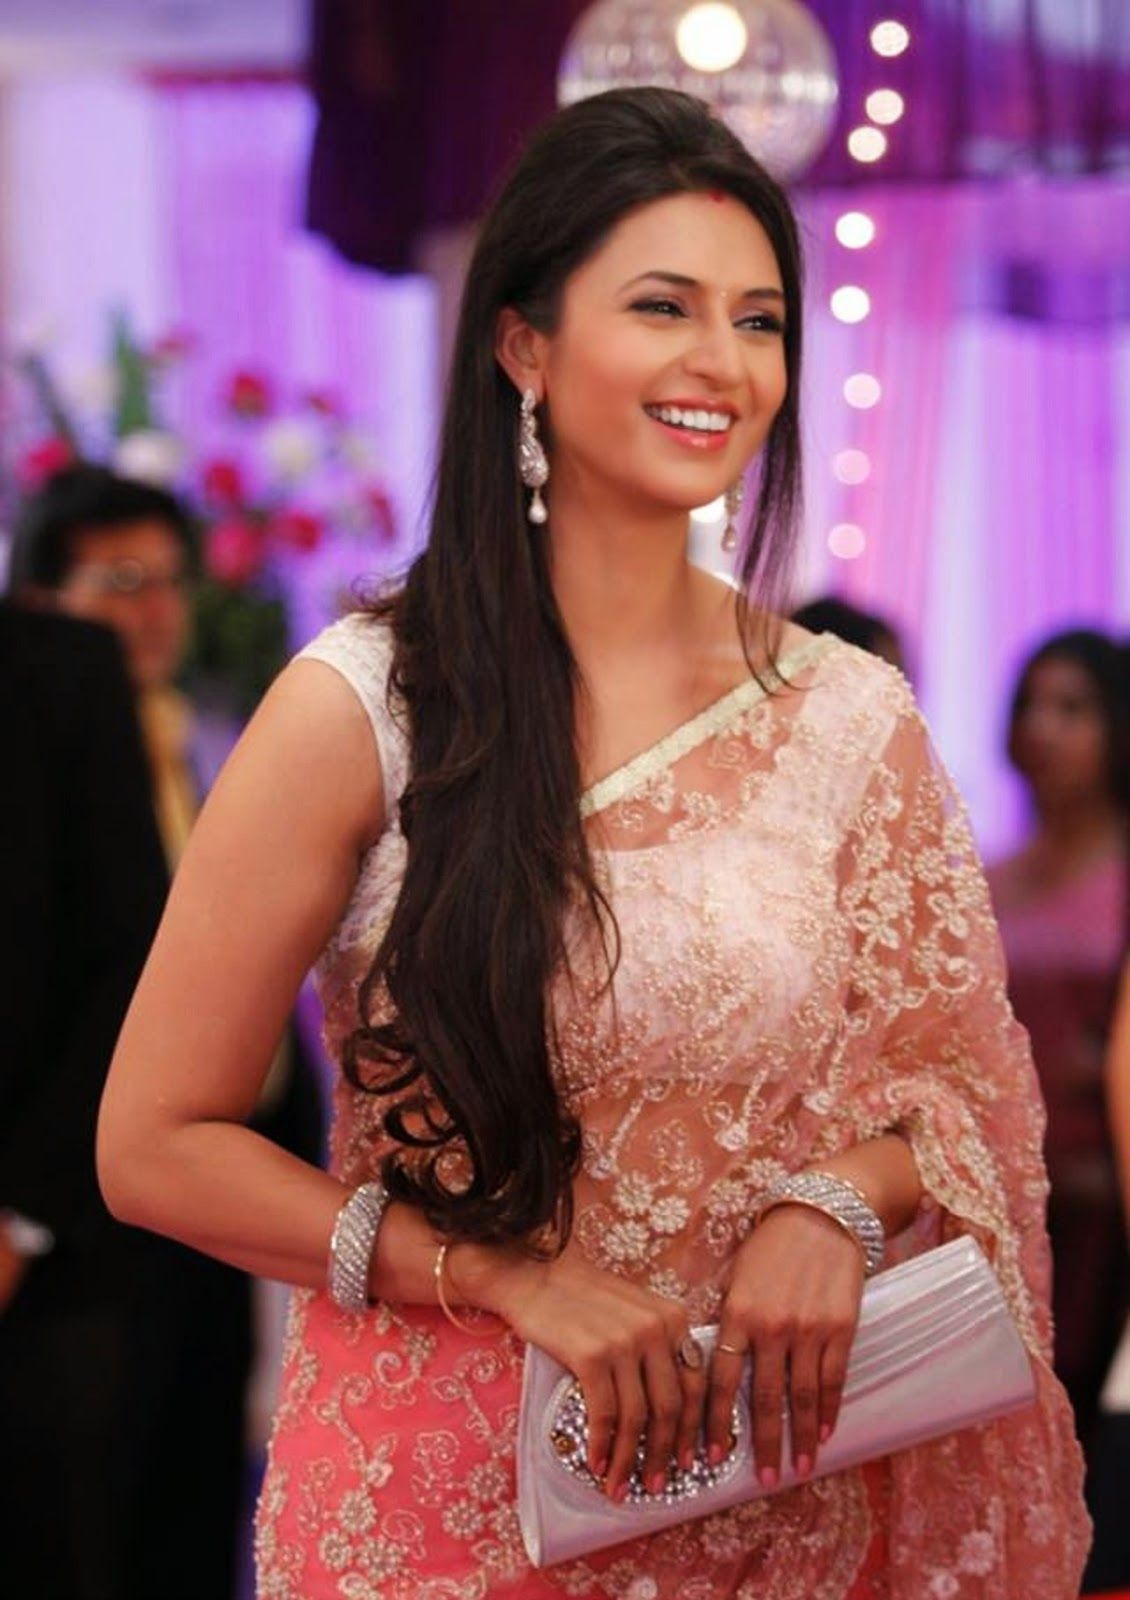 yeh hai mohabbatein wallpaper,facial expression,event,ceremony,skin,wedding reception